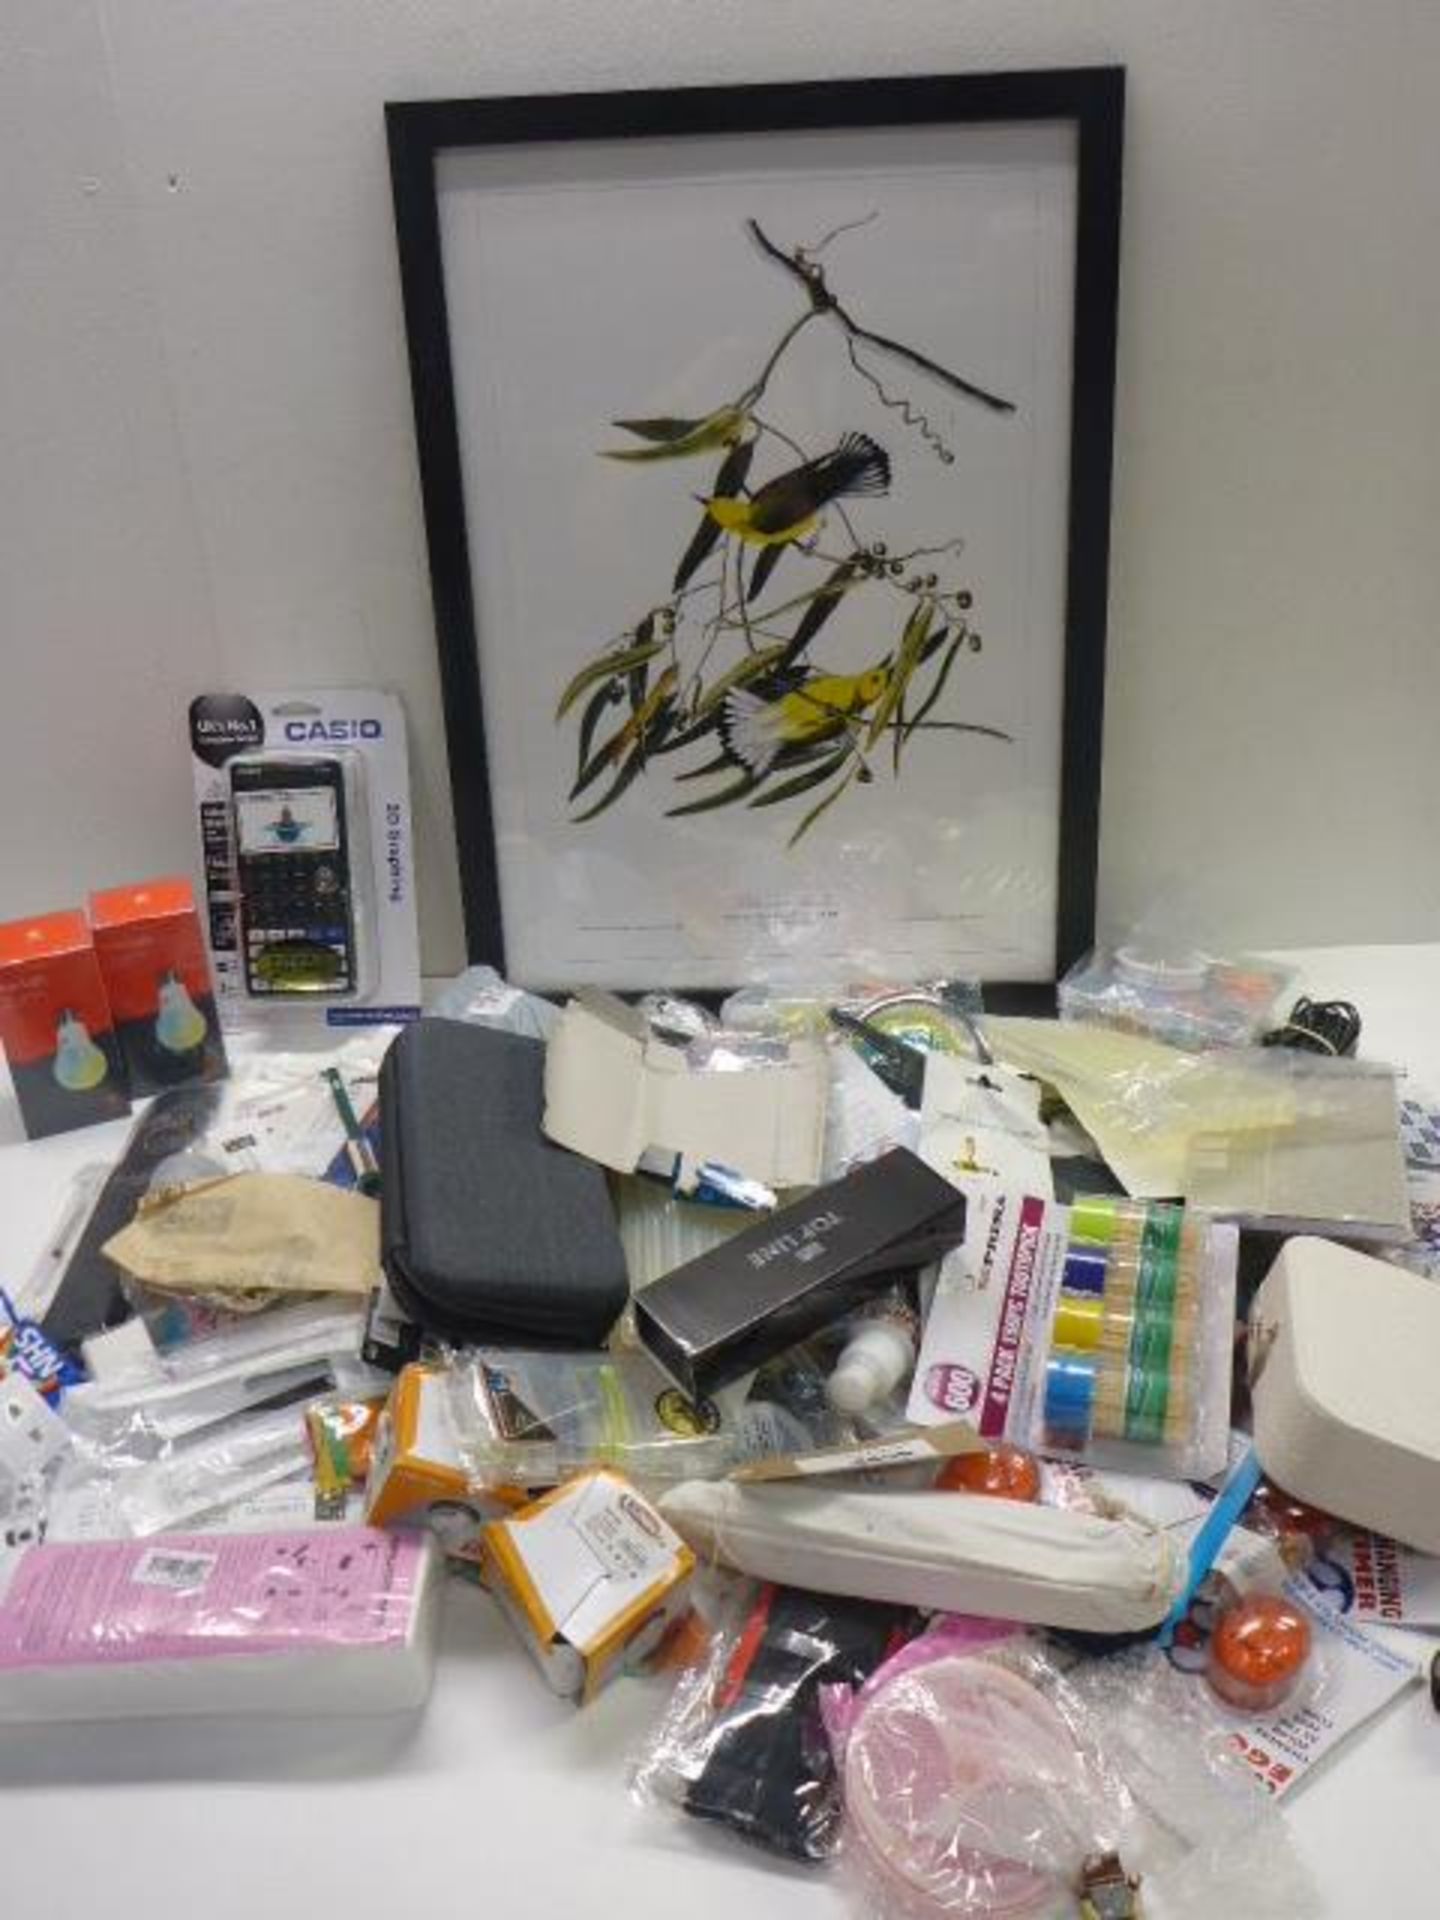 Framed picture of yellow warblers, Casio FX-CG50 calculator, 2 Hive smart light bulbs and